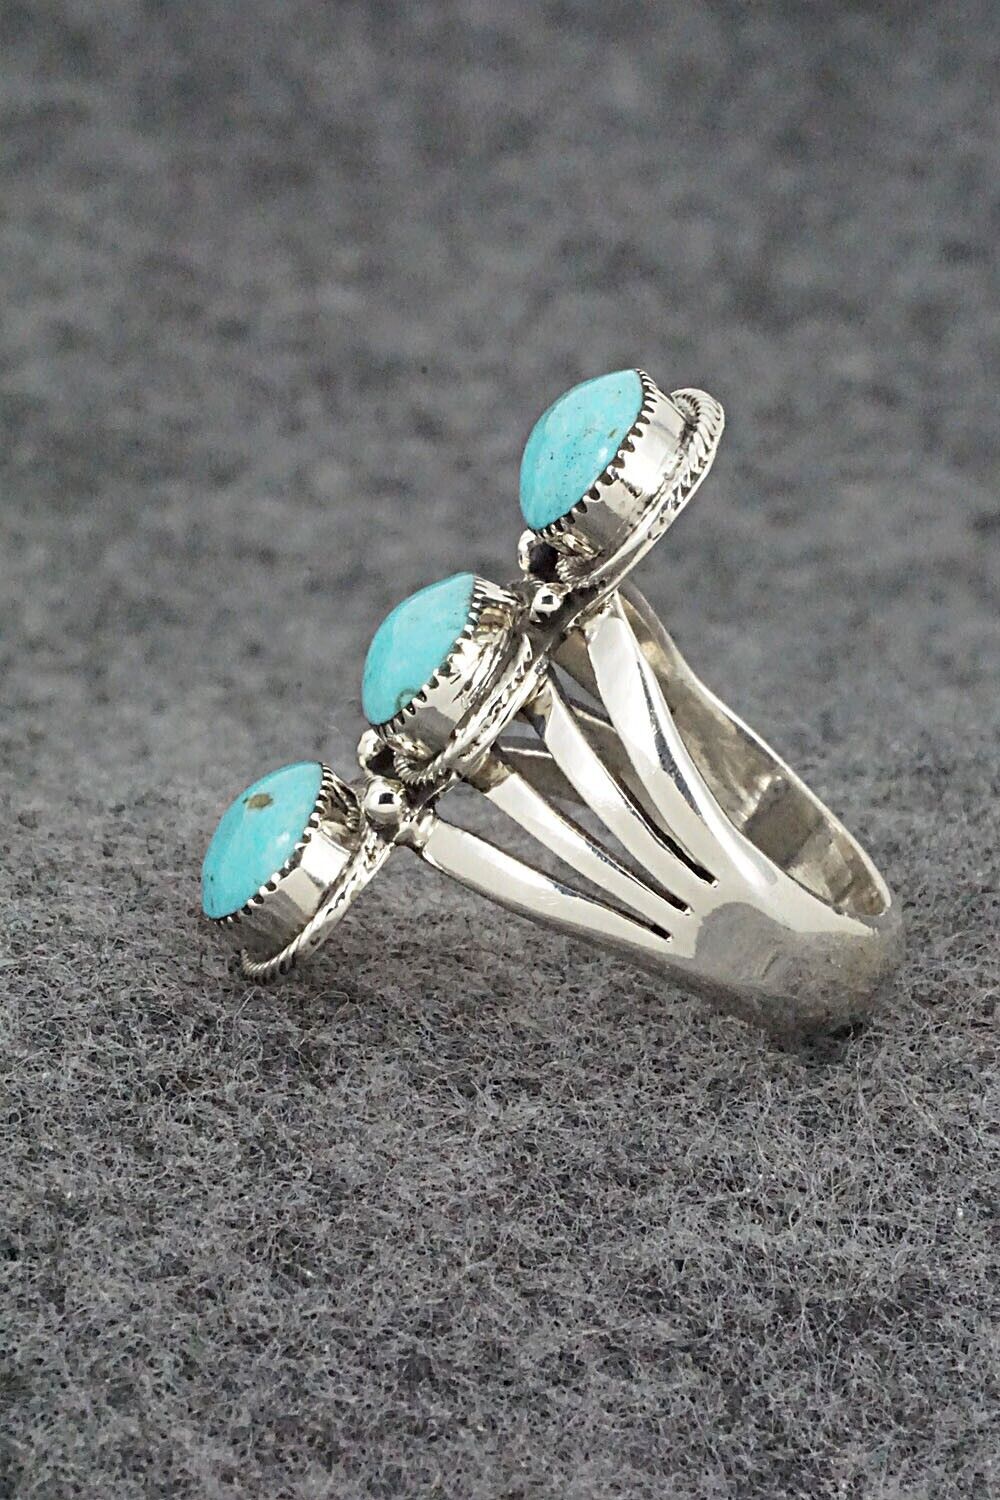 Turquoise & Sterling Silver Ring - Sheena Jack - Size 8